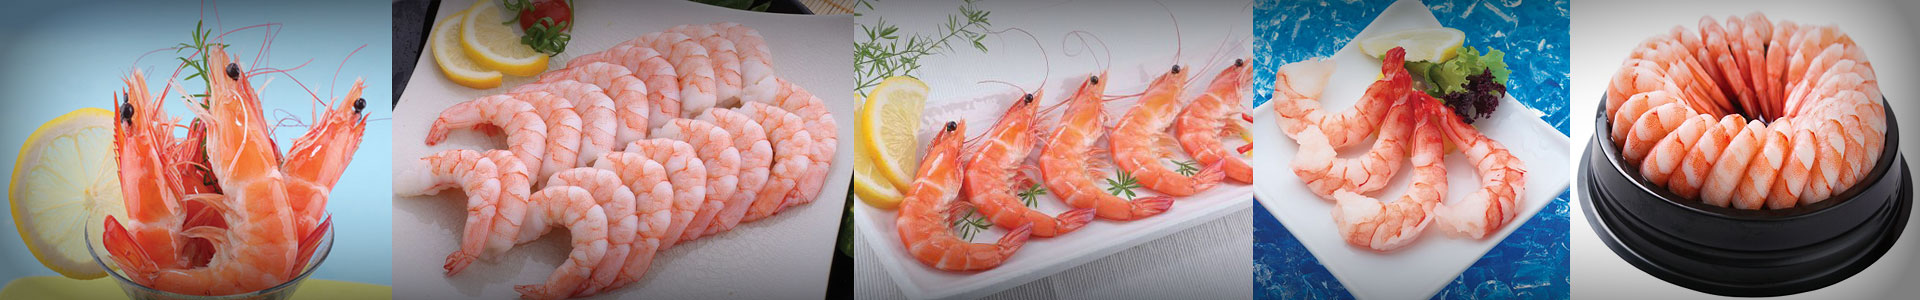 Cooked-Vannamei-Shrimp-Products